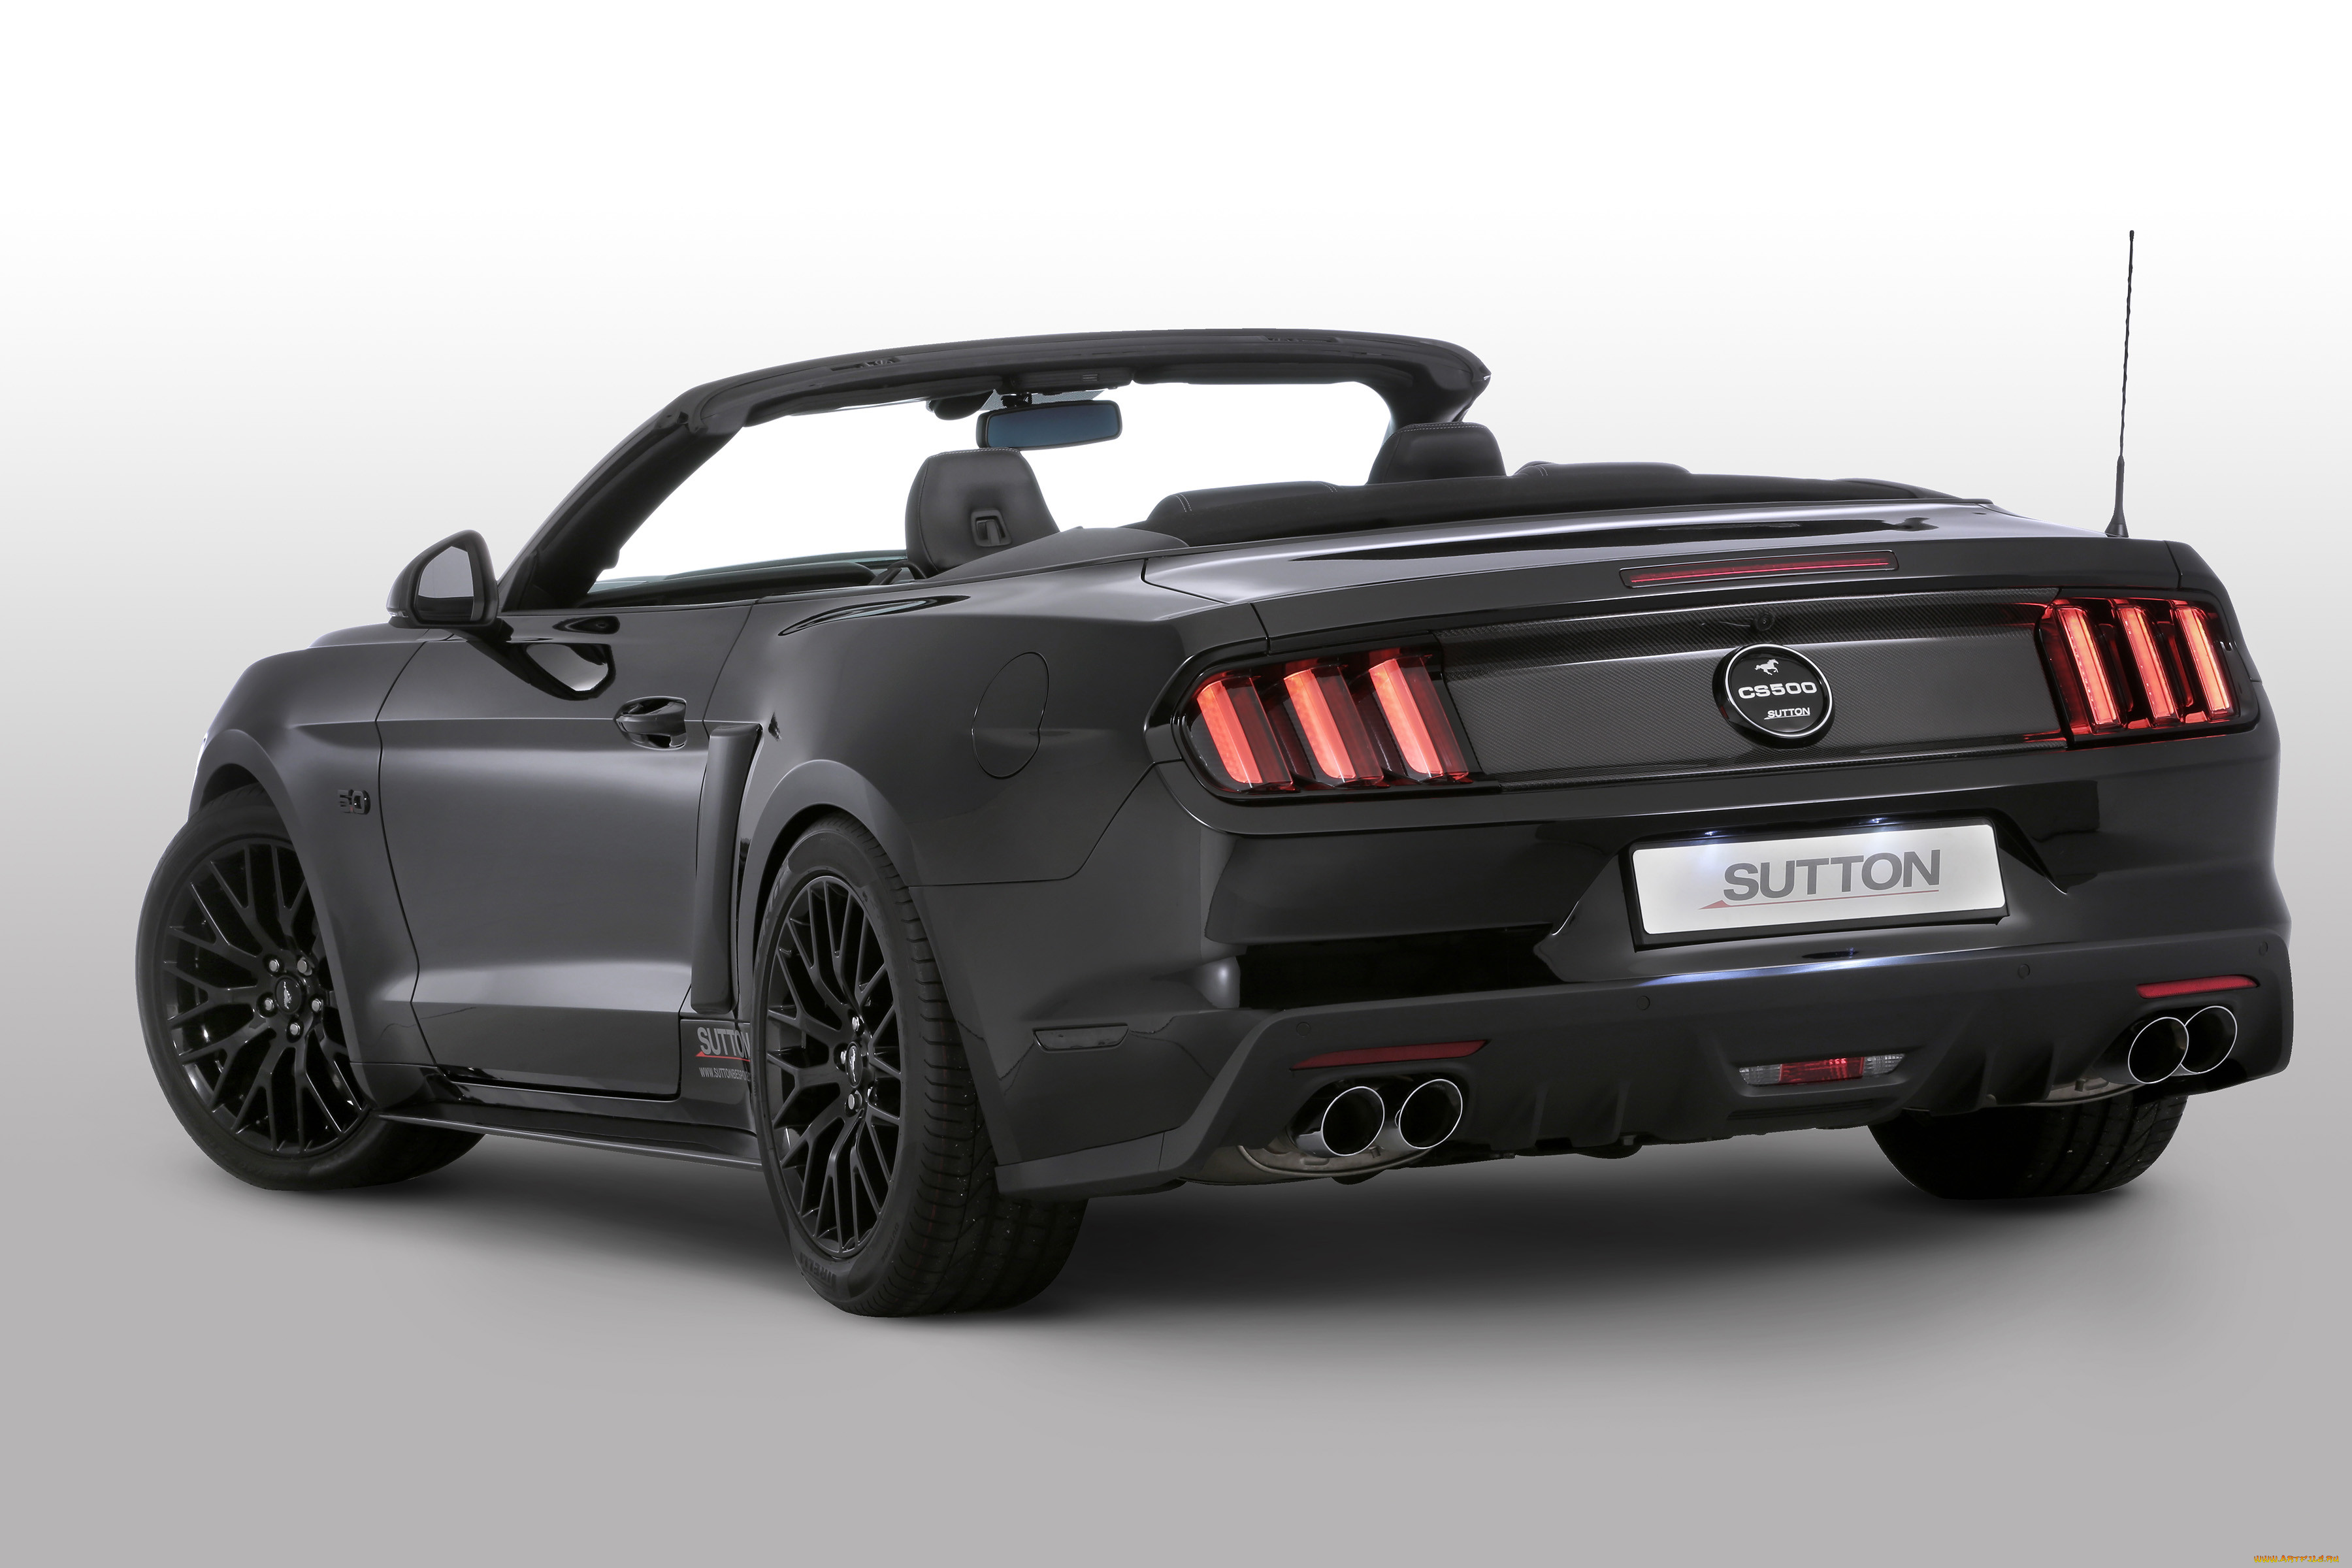 , ford, convertible, sutton, clive, cs500, mustang, 2016